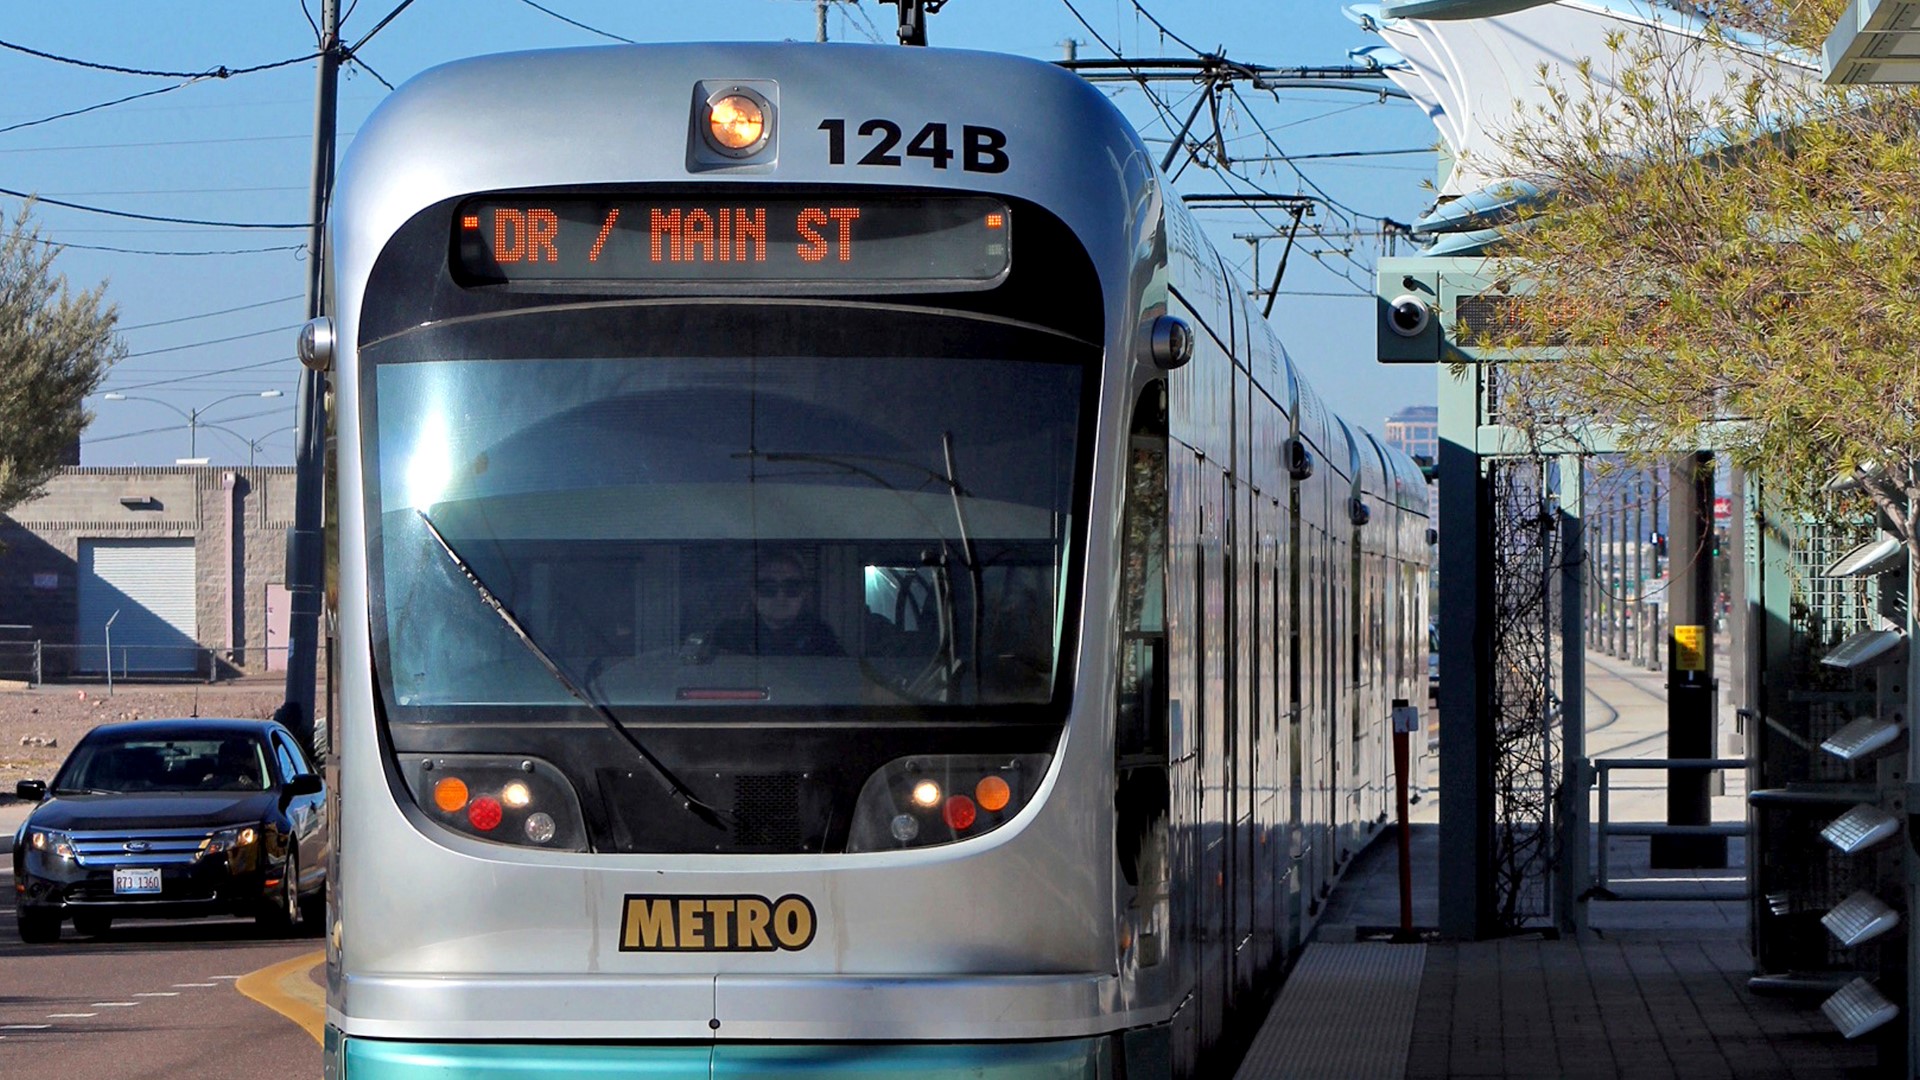 The future of public transportation in Phoenix is at stack with Prop 105. In the simplest of terms, a "yes" vote would end the light rail expansion and a "no" vote would allow the light rail to expand to the entire city.